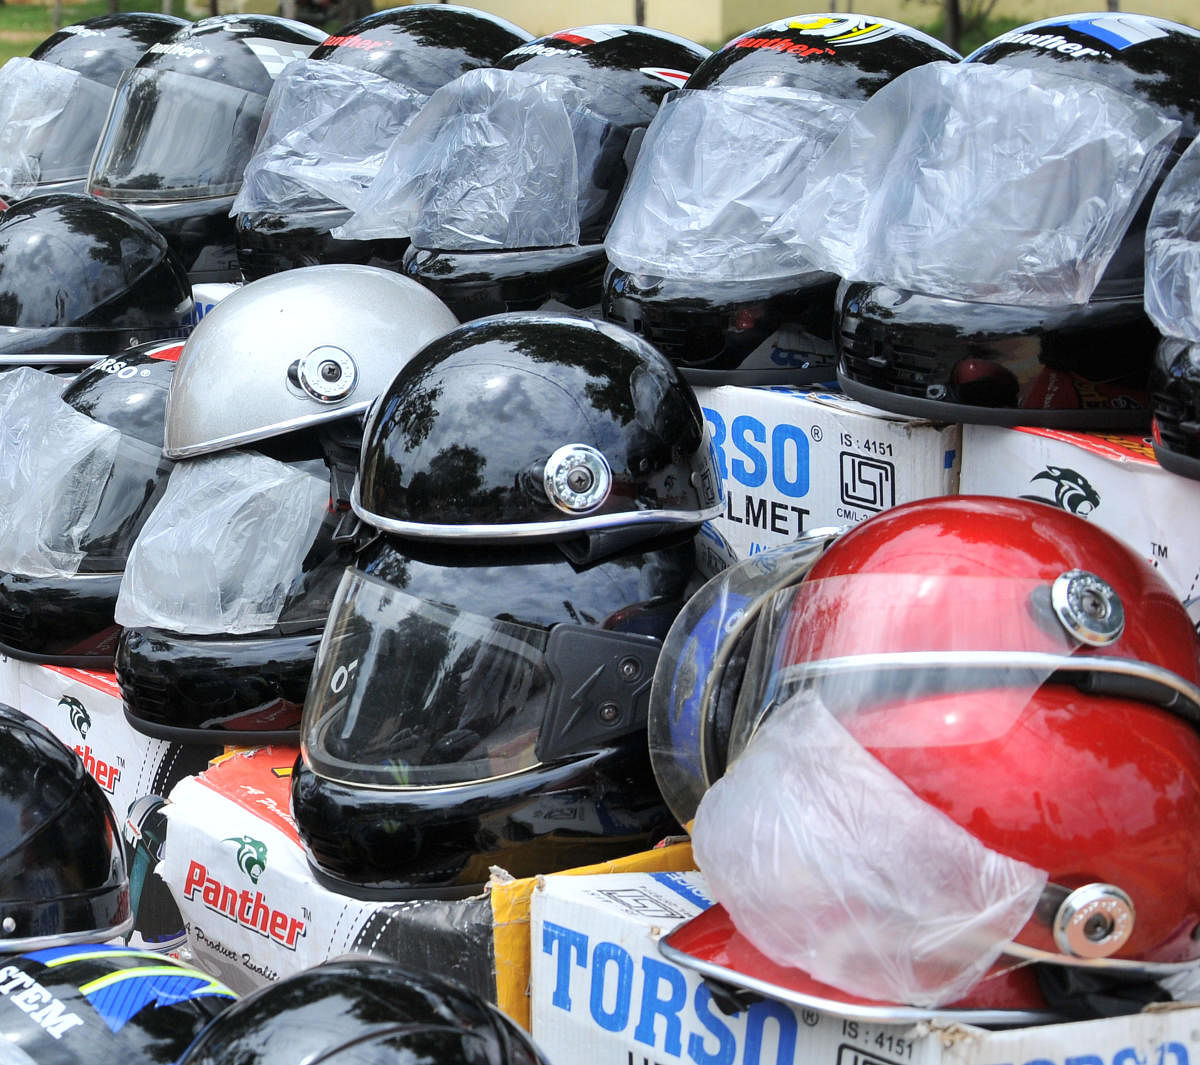 "However, helmets will be compulsory on state highways, nationals highways and roads falling under panchayat limits," said state transport minister R C Faldu. DH Photo